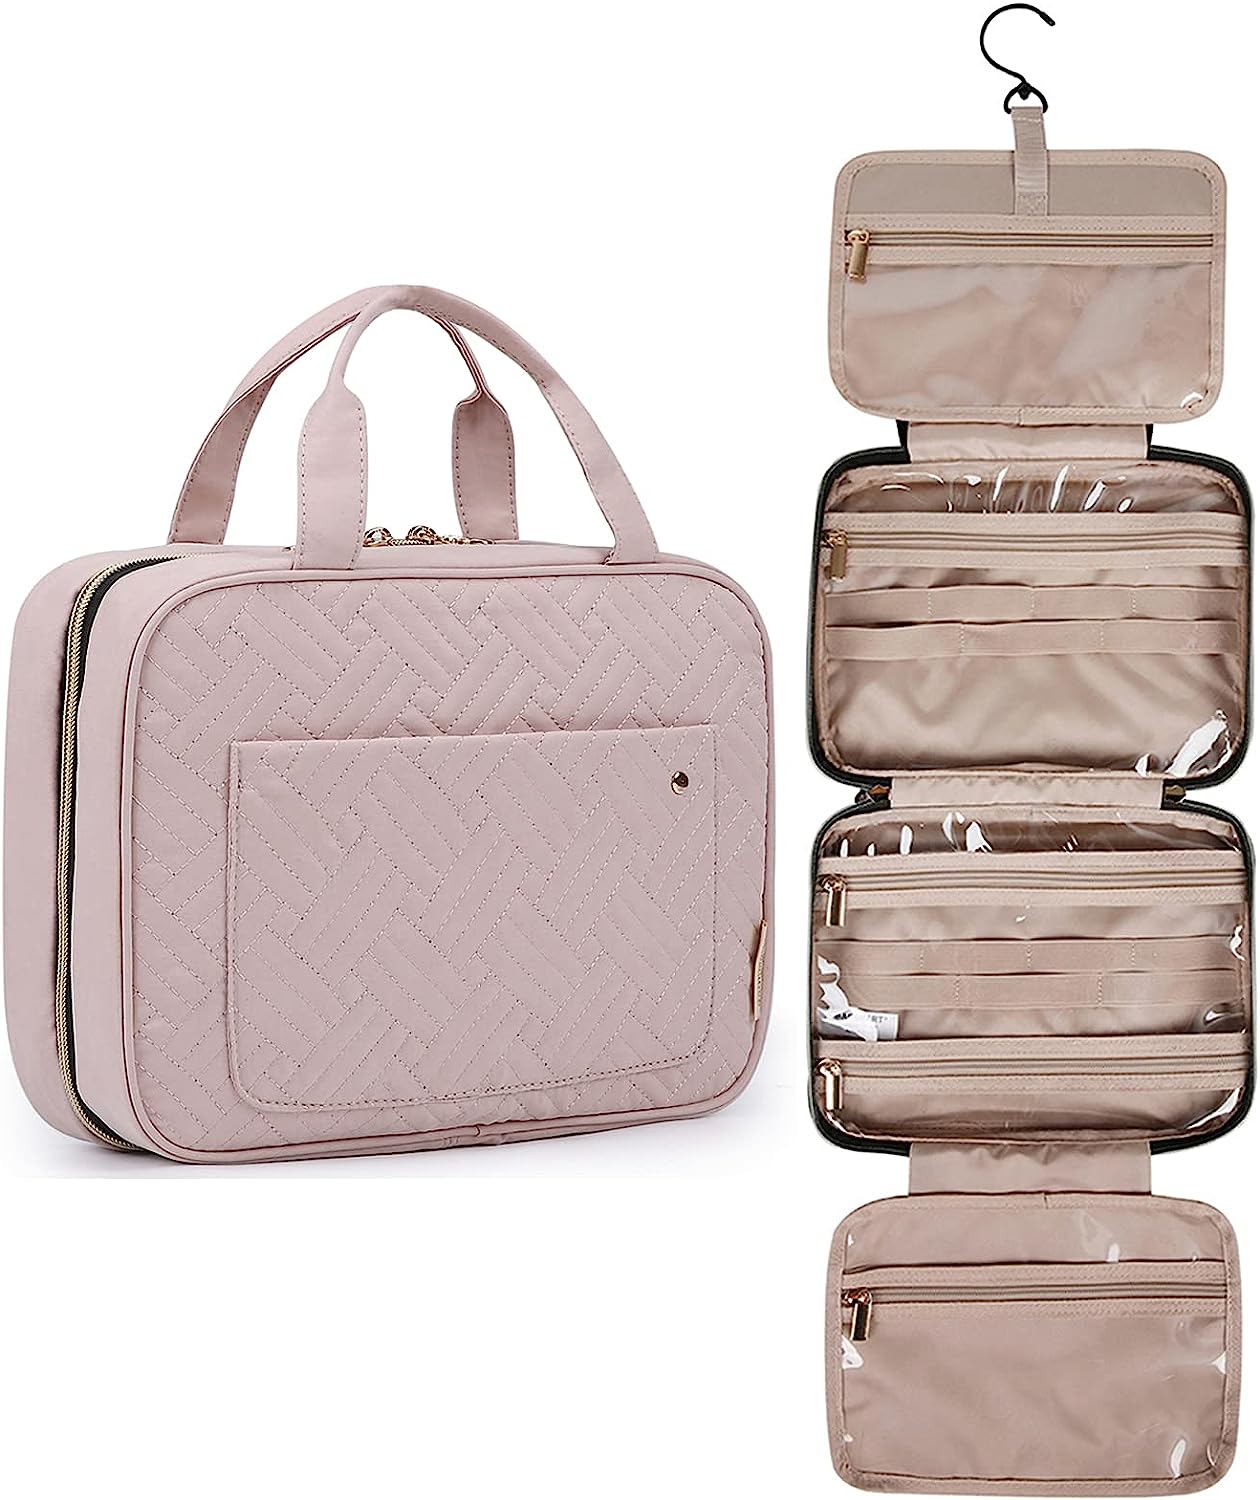 BAGSMART JEWELRY TRAVEL ORGANIZER - PINK LEATHER - CAN HOLD LOADS OF  STUFF!!